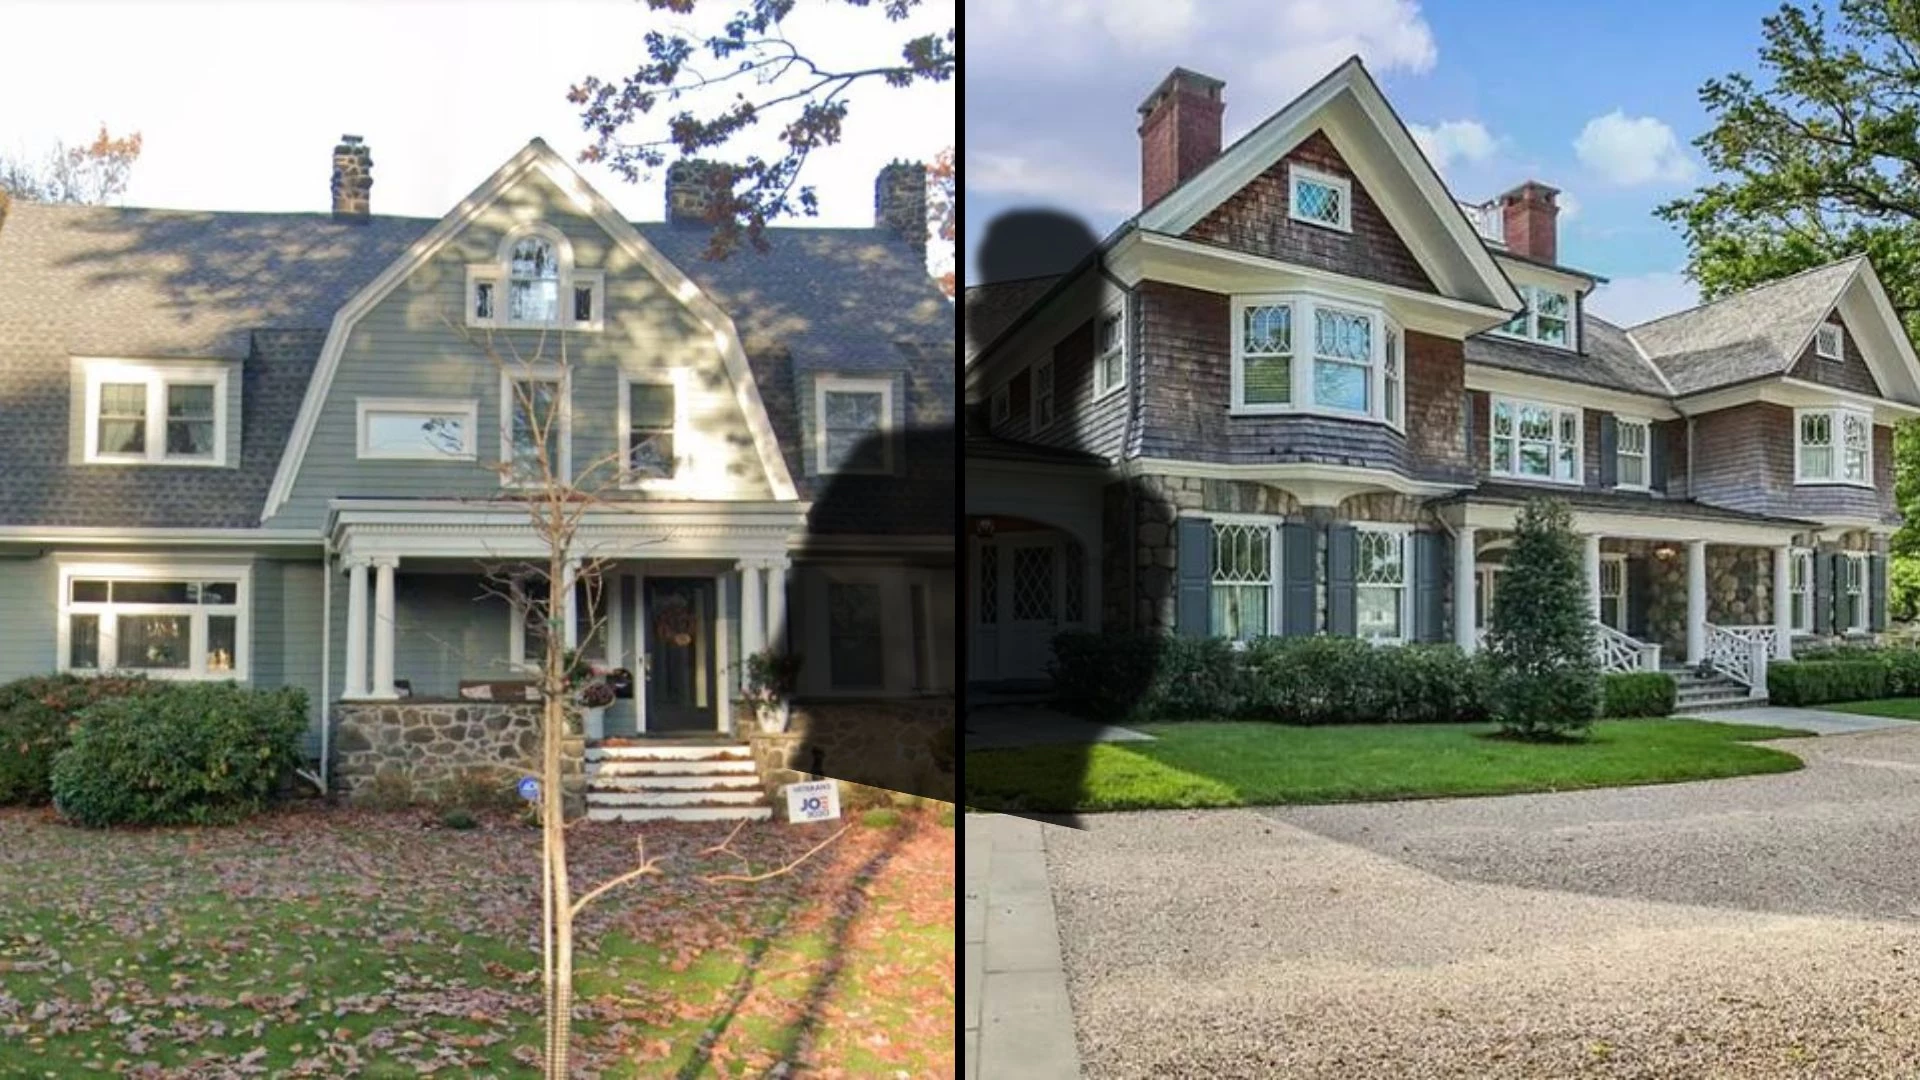 657 Boulevard: All About The Real House 'The Watcher' Is Based on